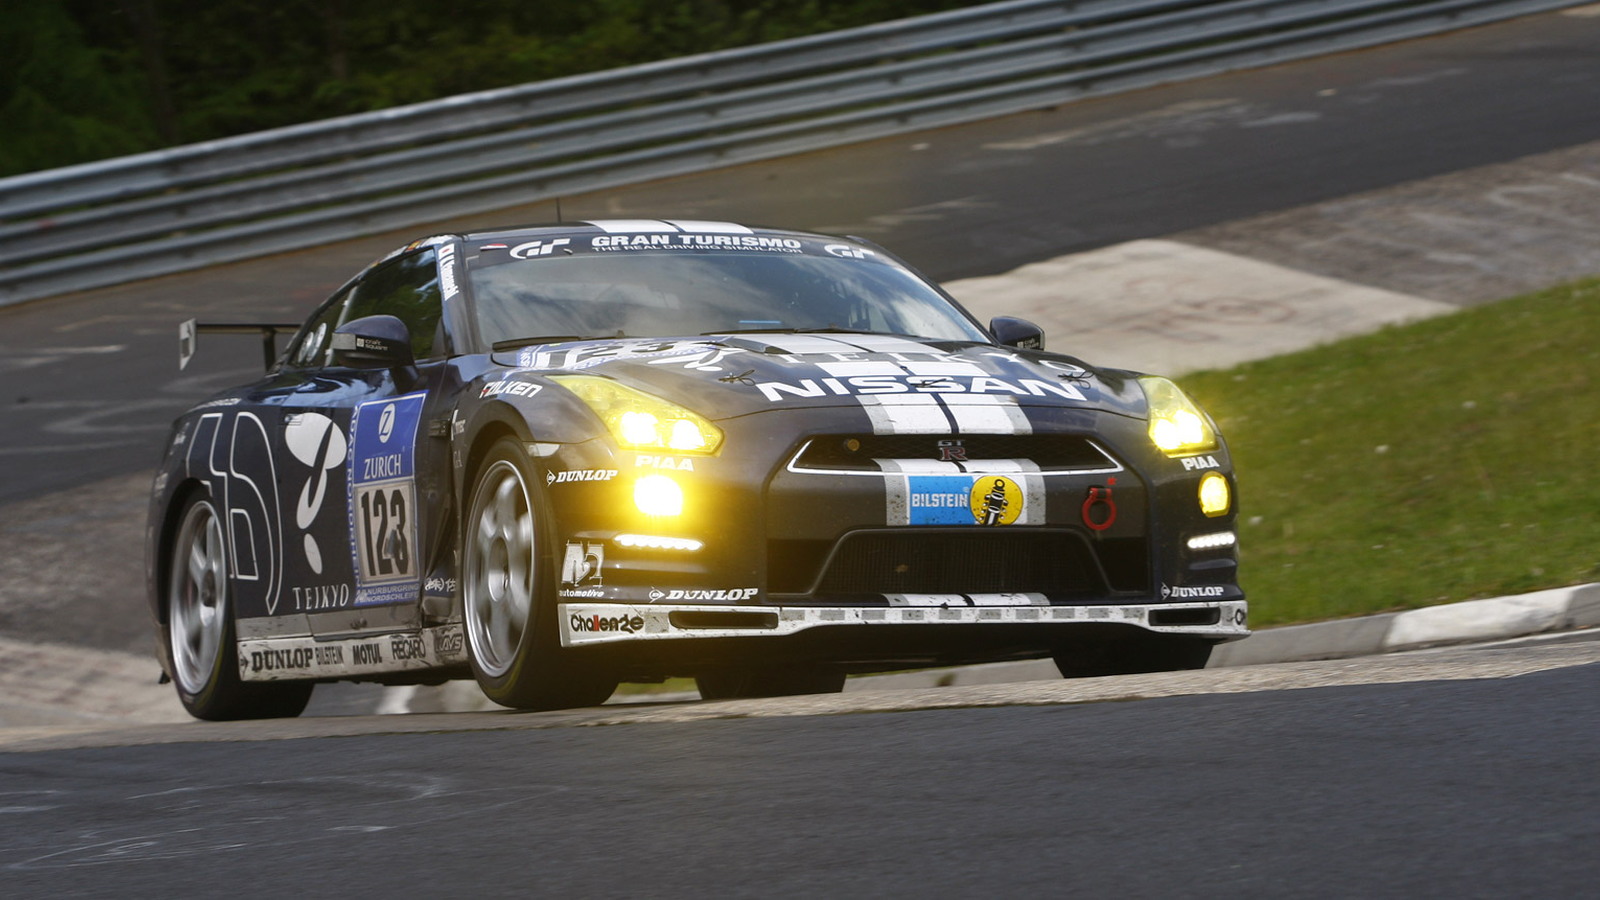 2013 Nissan GT-R (Club Track Edition) in the Nürburgring 24 Hours